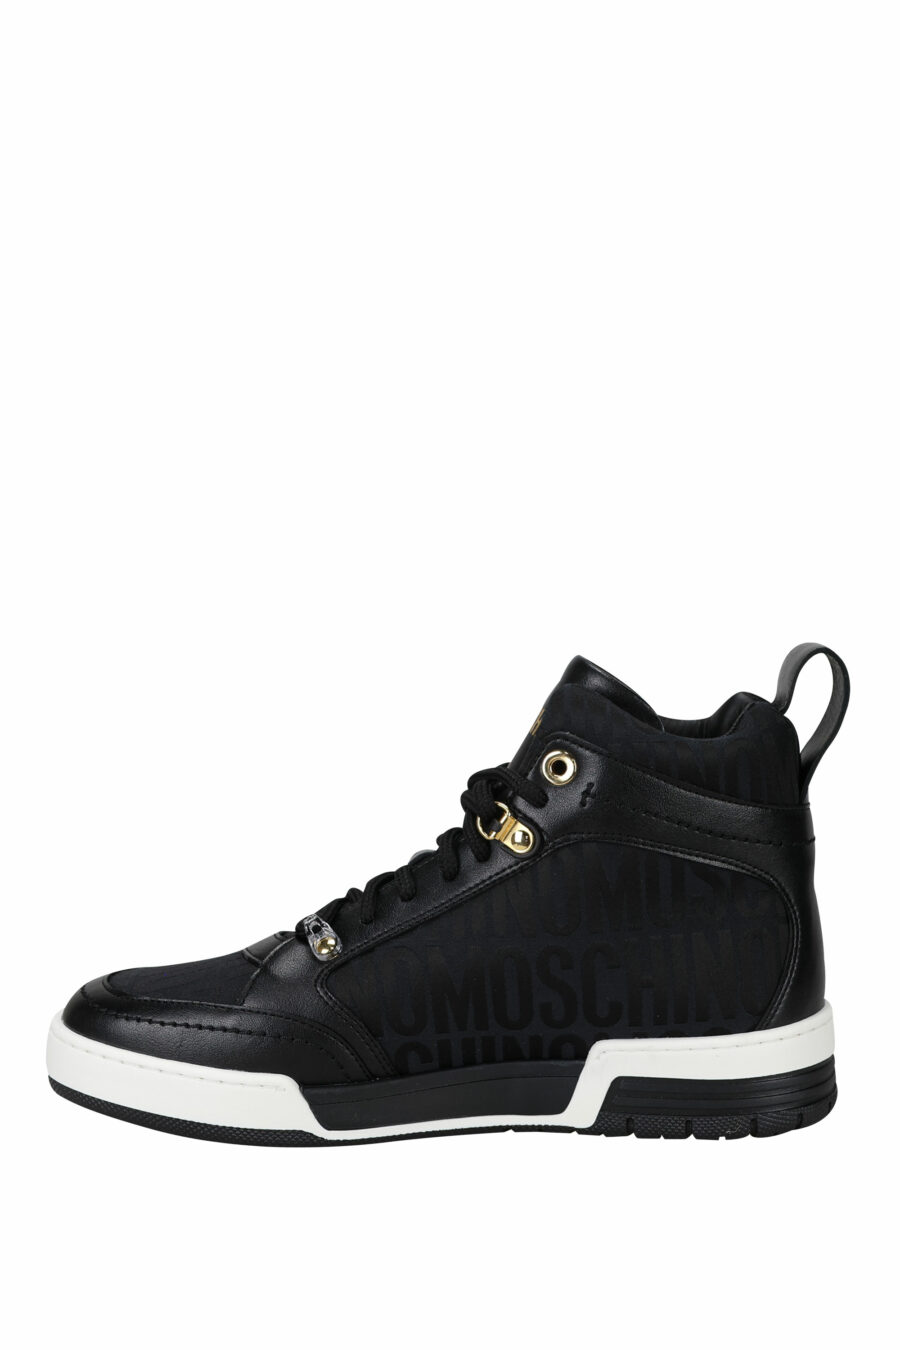 Black "all over logo" high top trainers with white sole - 8054653825758 2